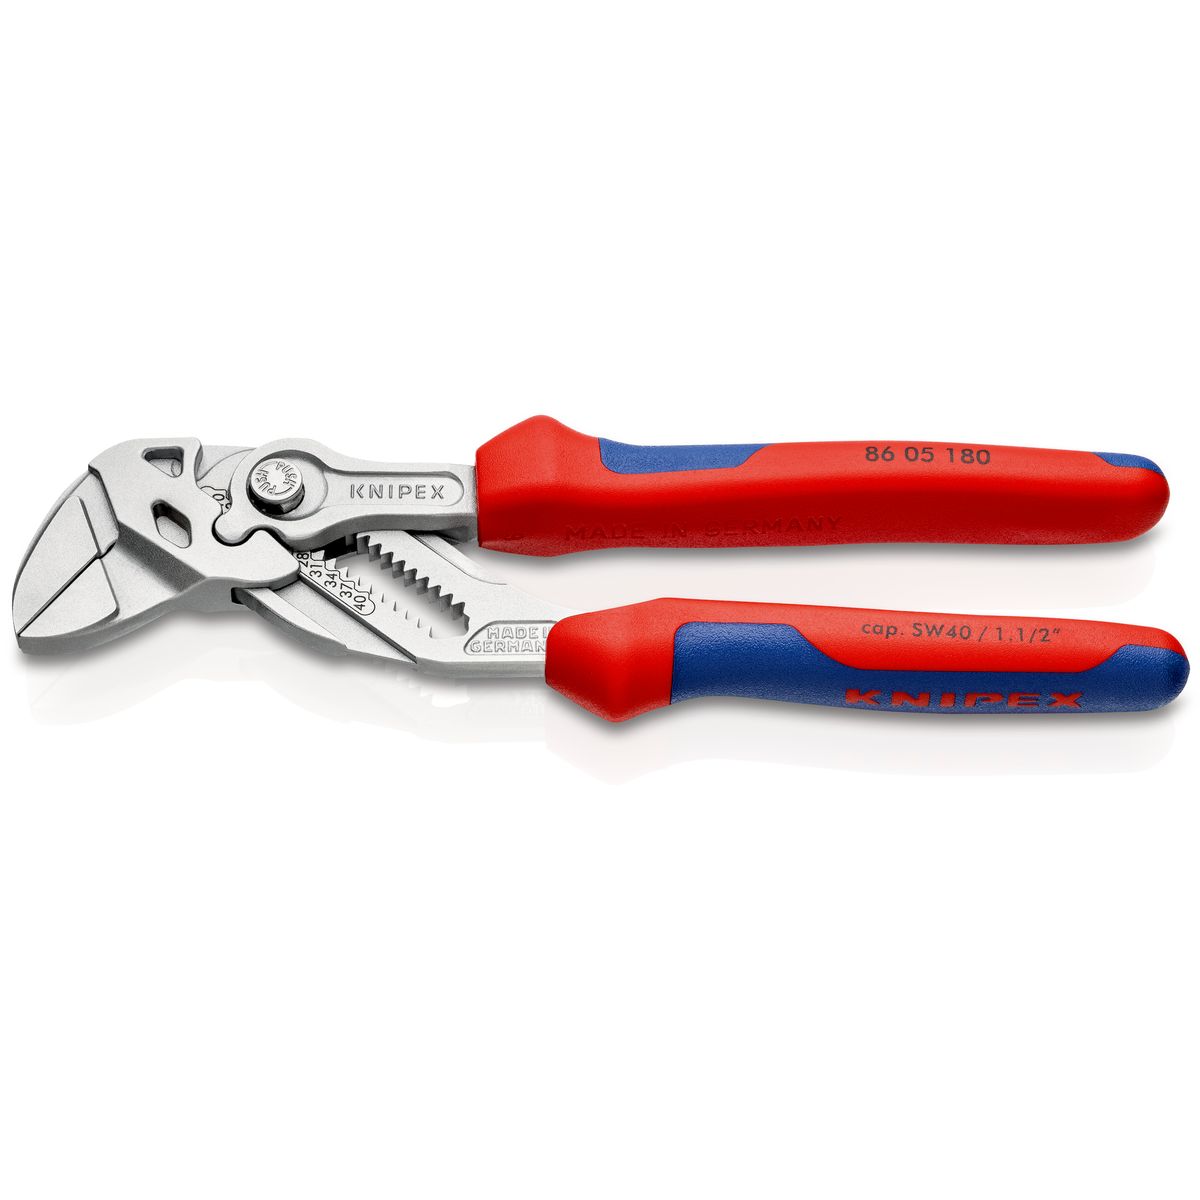 PLIER WRENCHES 8605180 Knipex